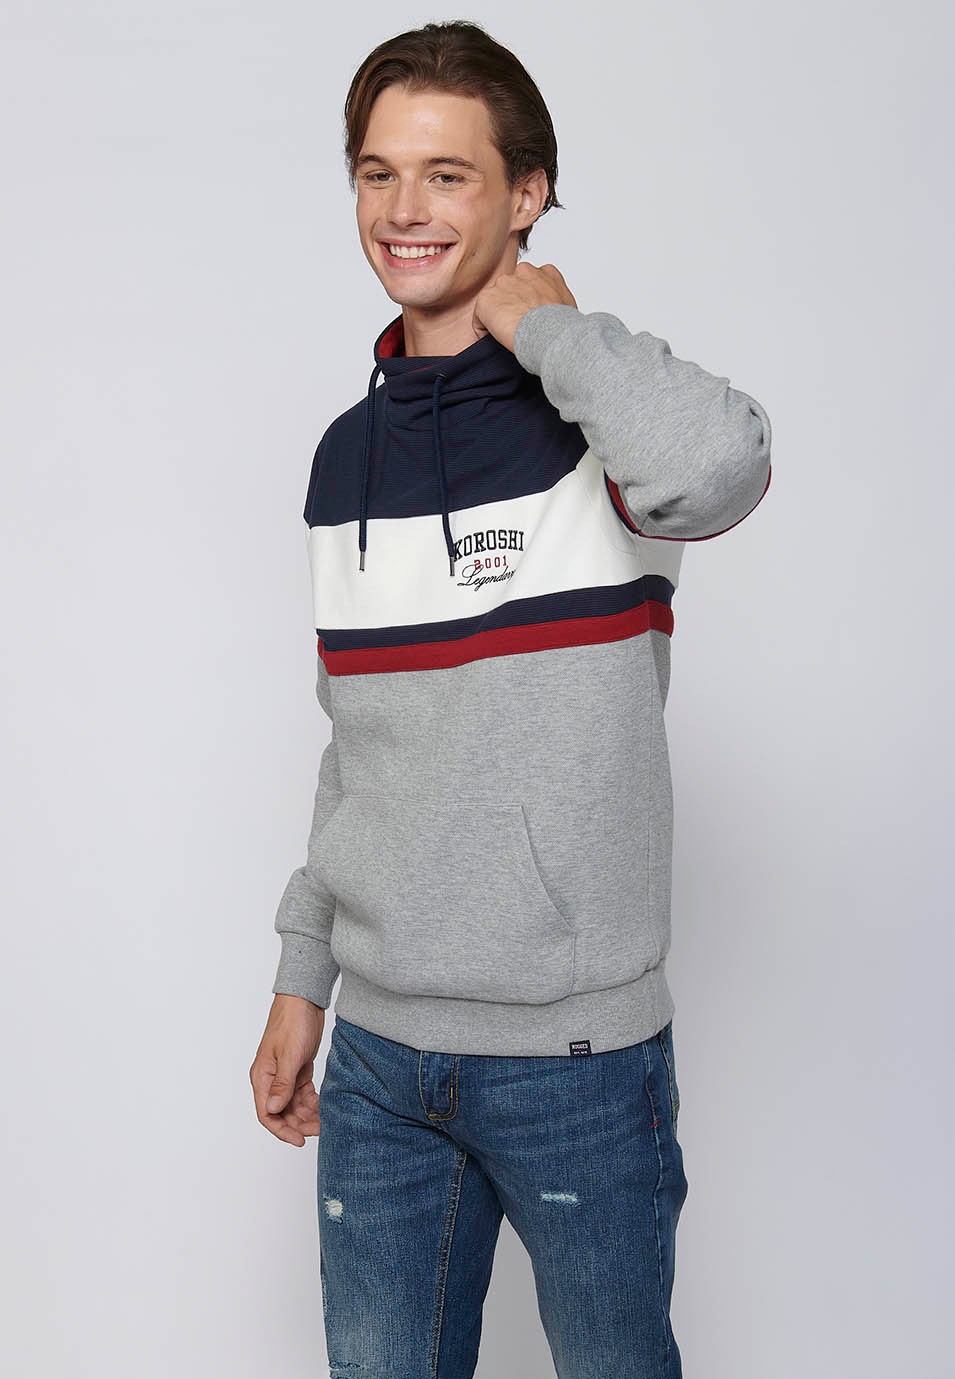 Long-sleeved sweatshirt with hooded collar and navy striped details for men